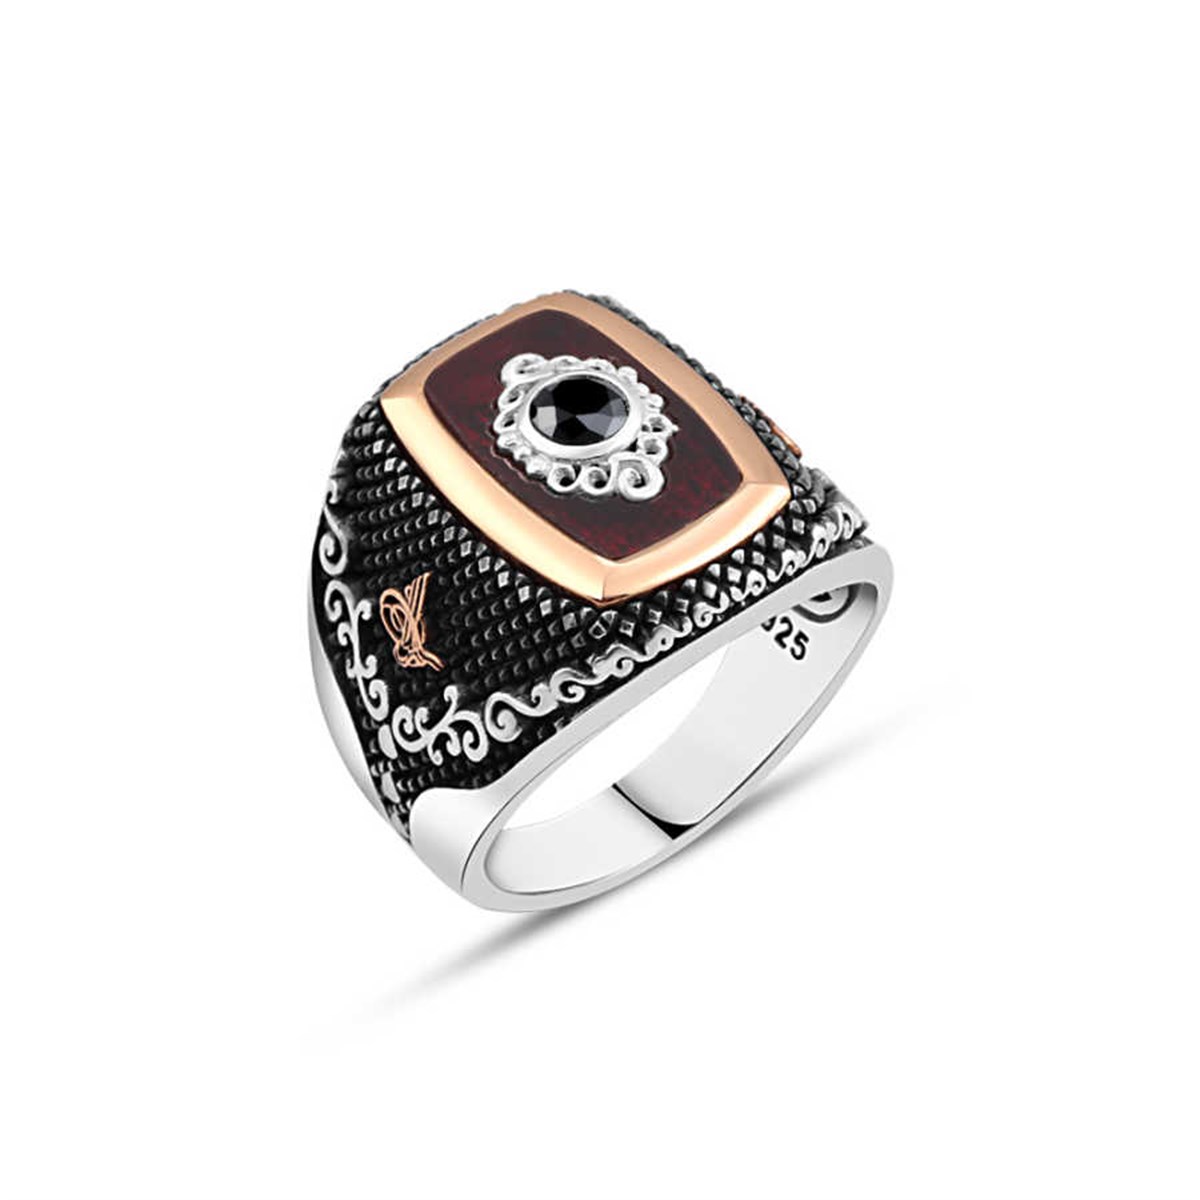 Sterling Silver Men's Ring with Synthetic Amber Stone and Zircon Stone in the Middle